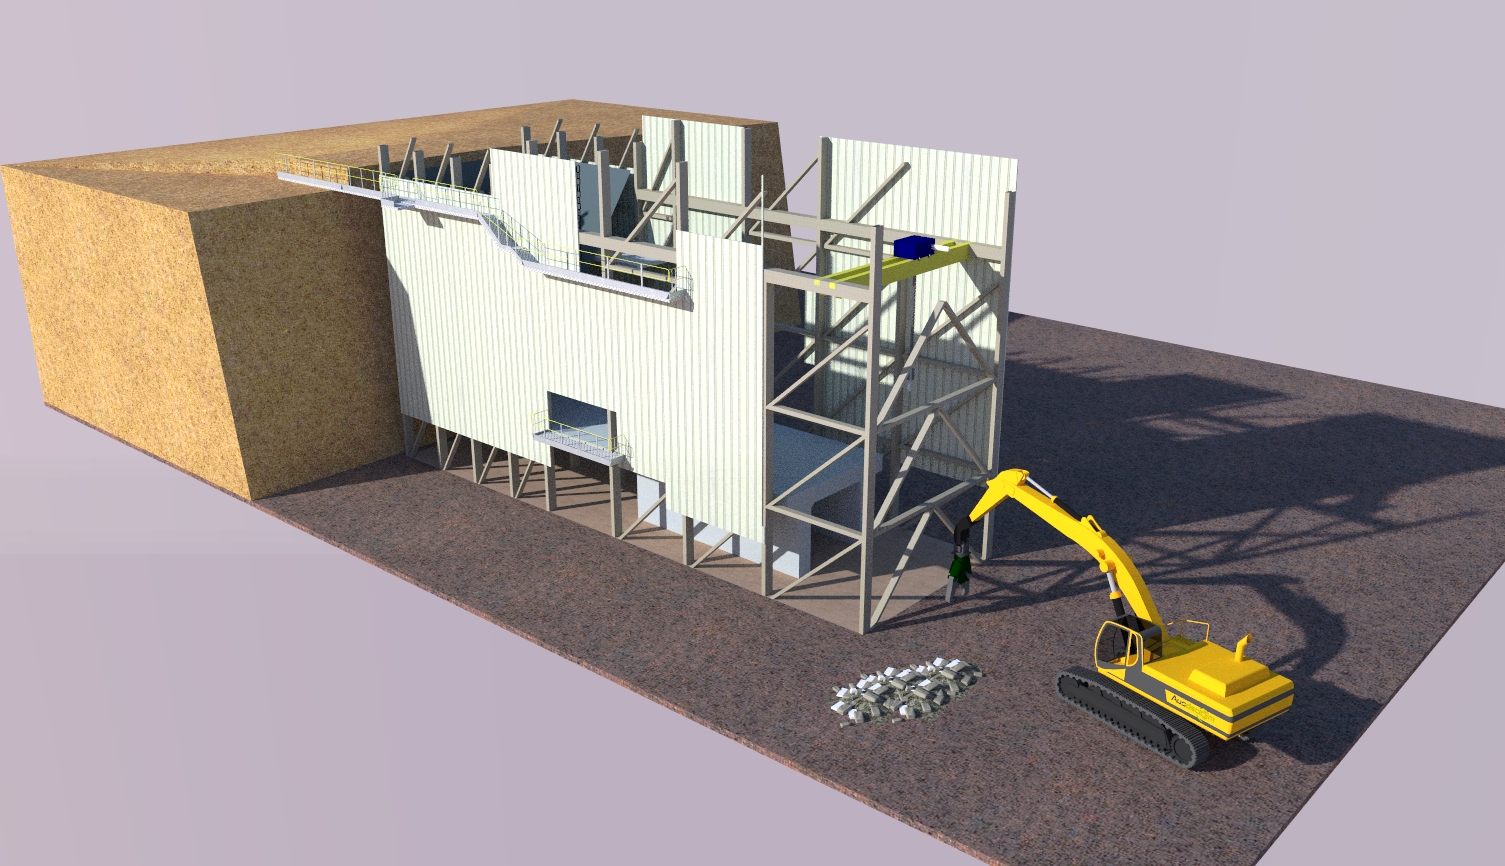 http://Engineering%20Model%20for%20Primary%20Crushing%20Building%20Demolition%20Ausdecom